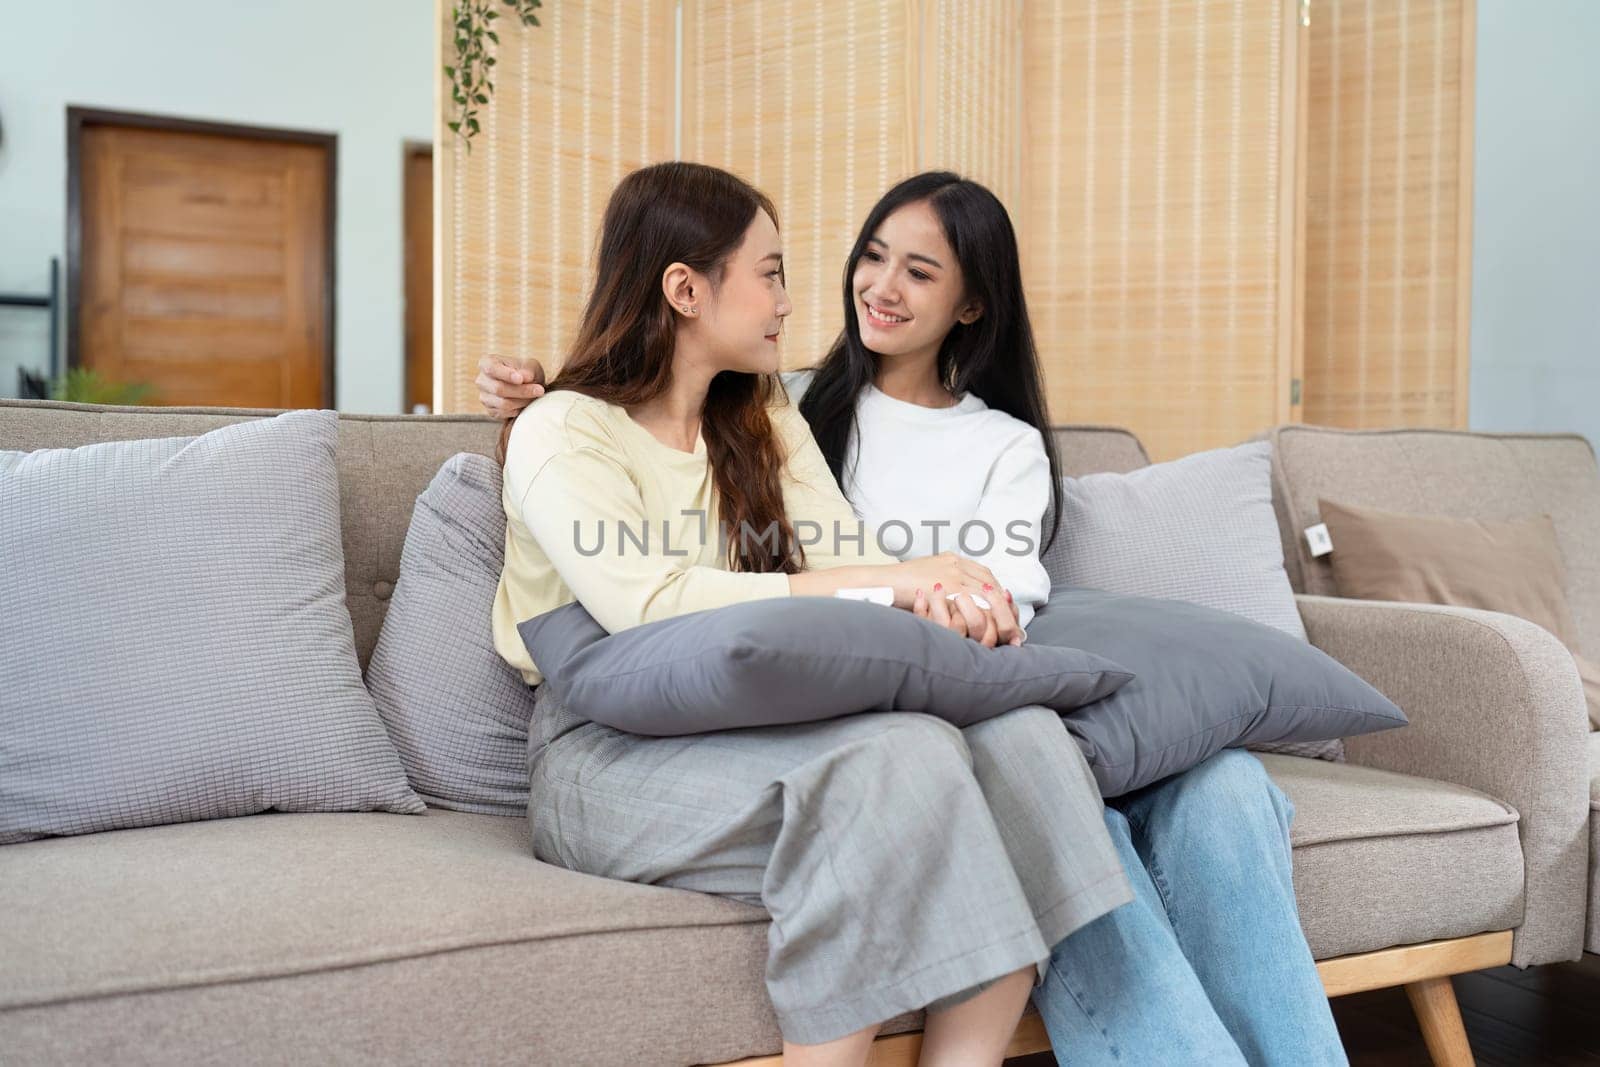 gay couple hug on sofa to relax together in healthy relationship love connection. Lgbtq couple concept.